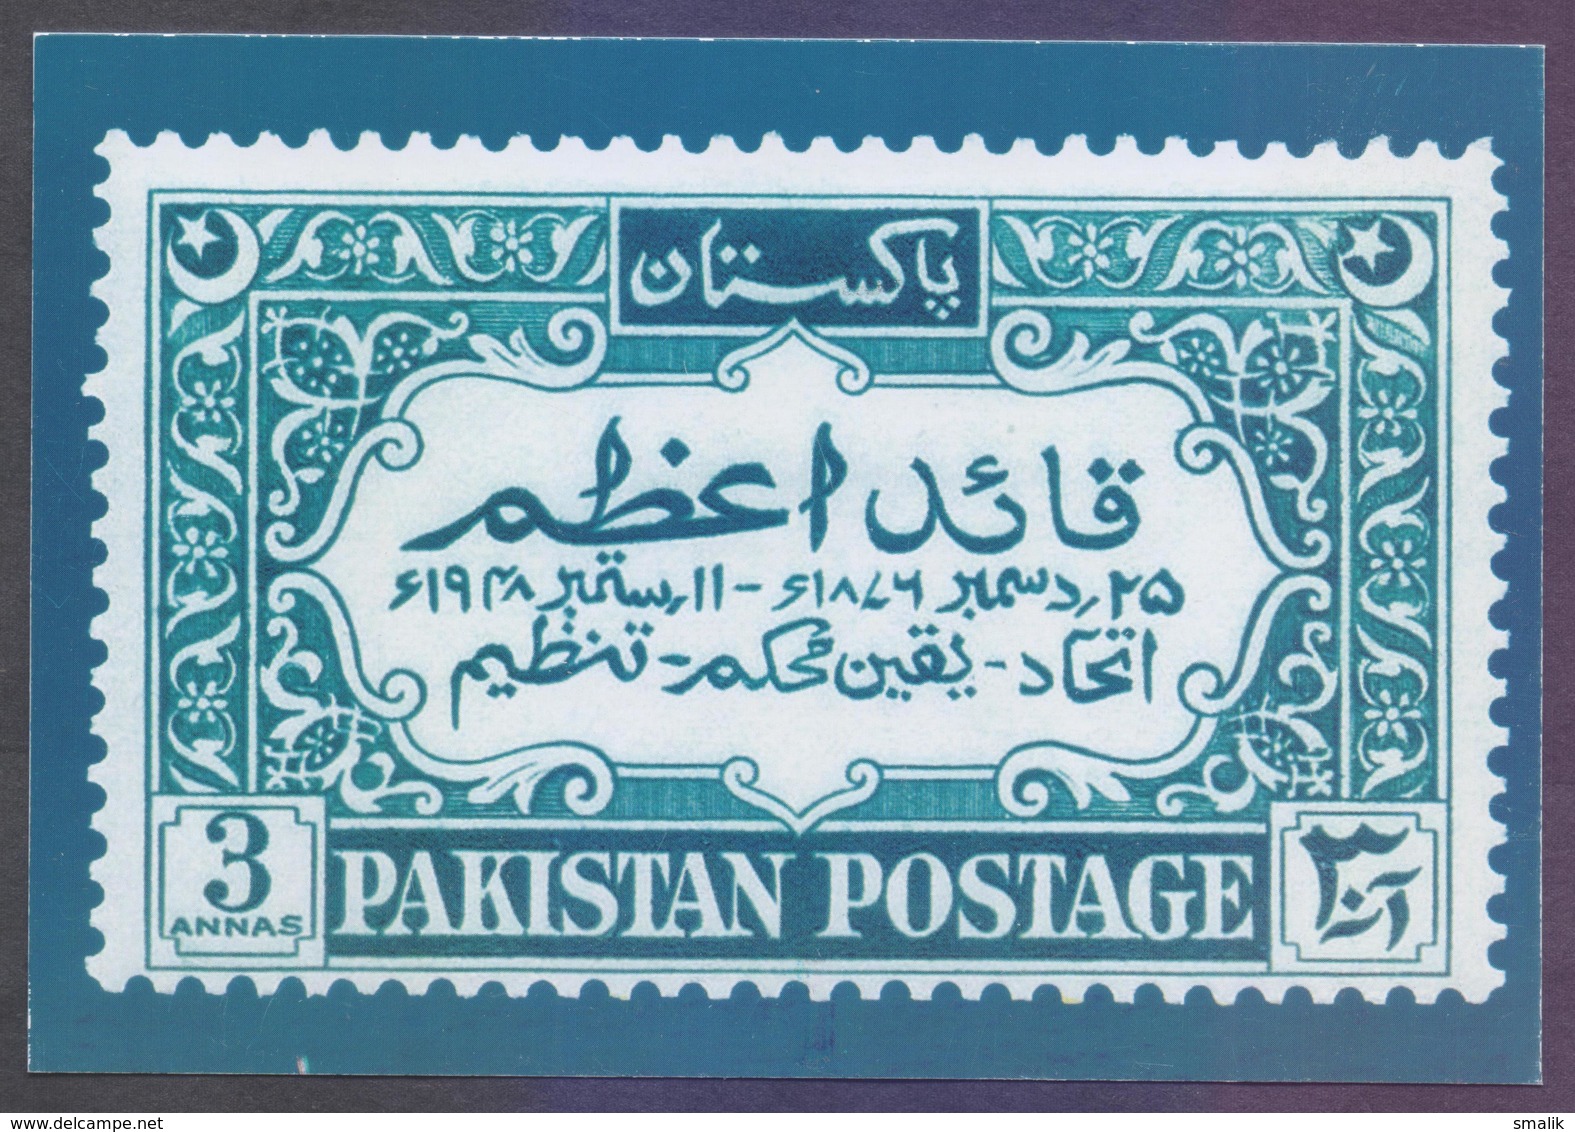 PICTURE POST CARD - "Pakistan 2019" National Stamp Exhibition, Image Of 3 Annas Jinnah Death Anniversary 1949 - Pakistan